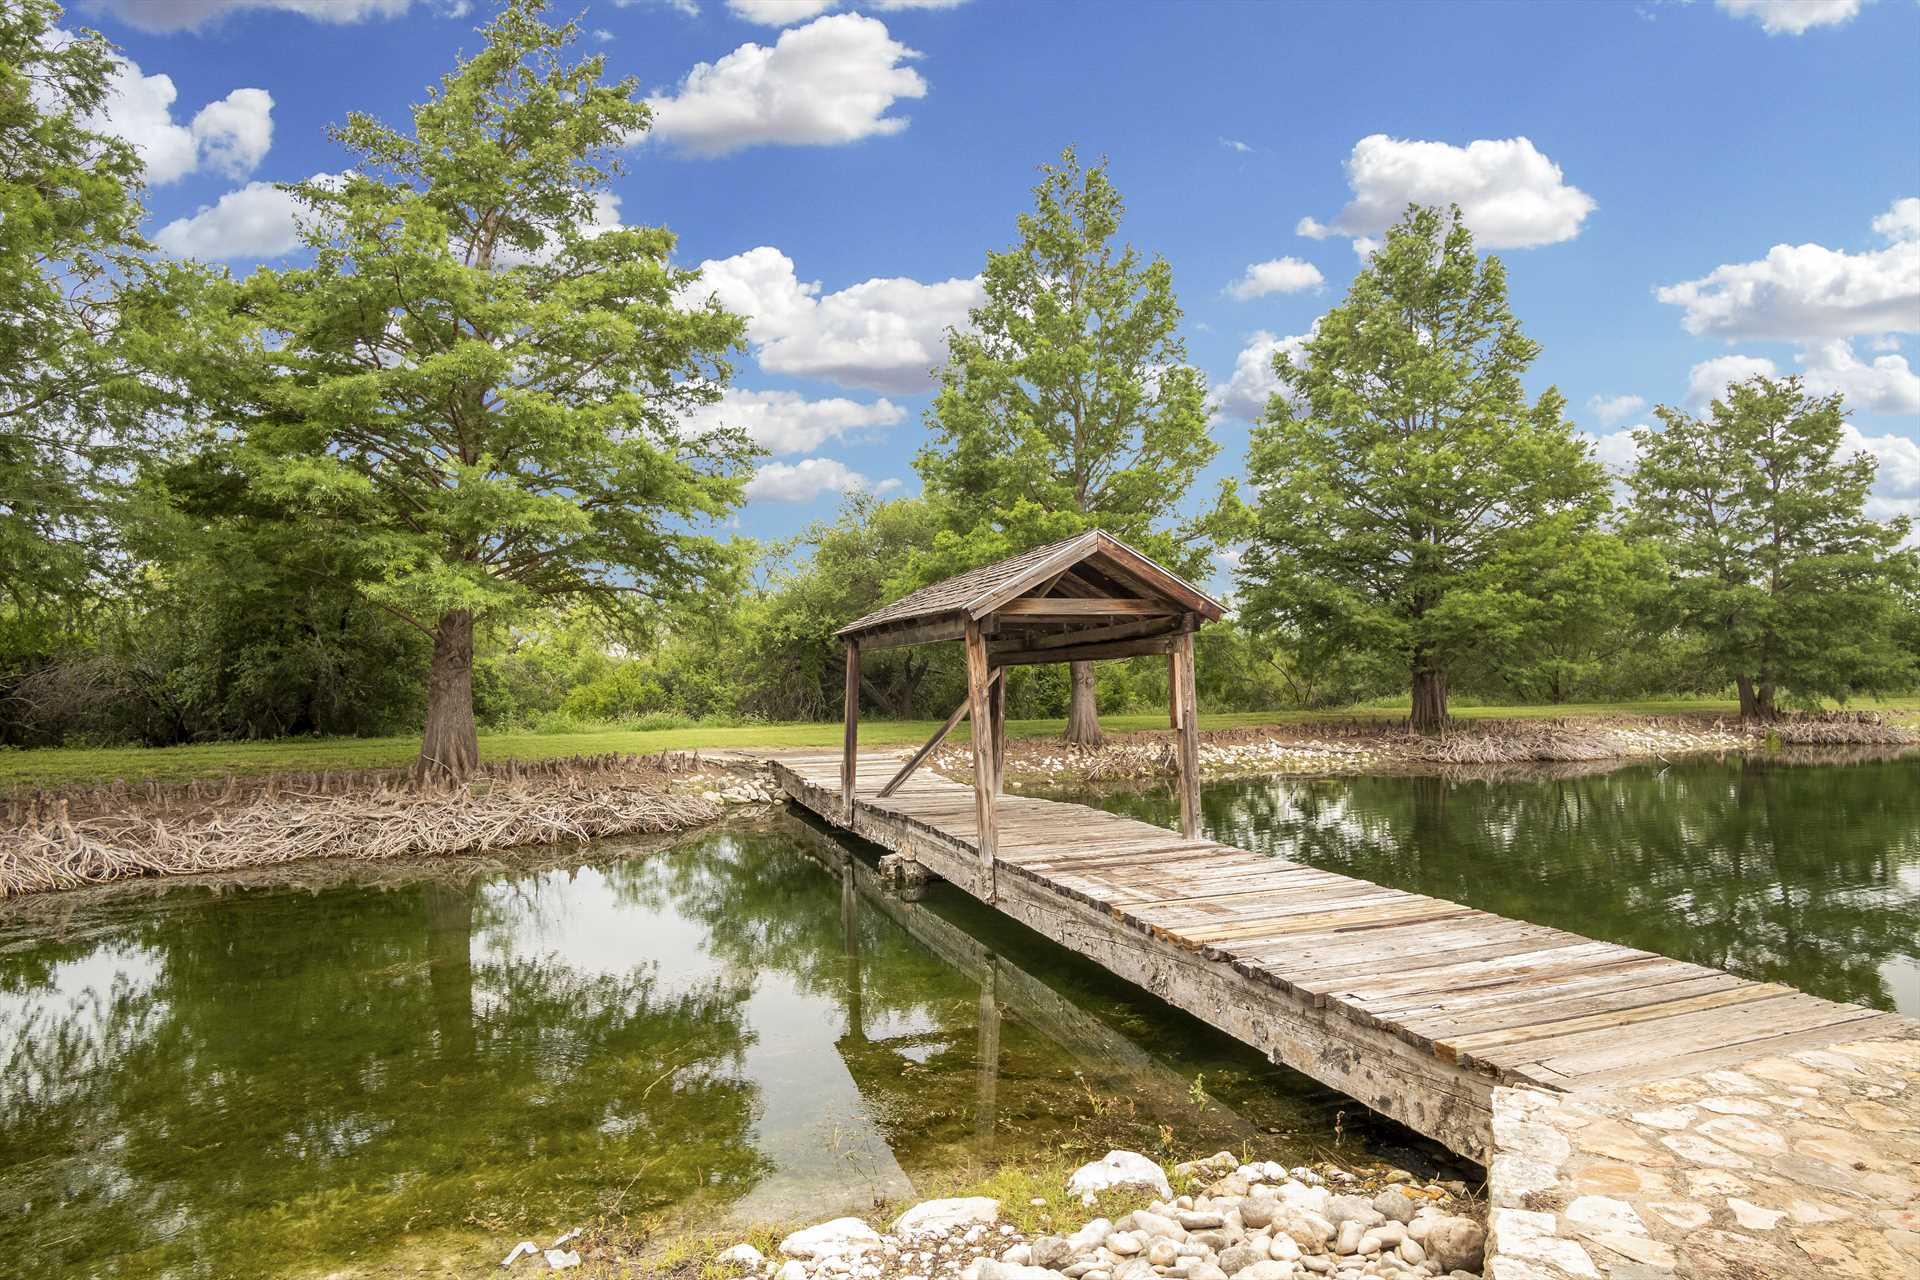                                                 The covered bridge and dock that crosses the neck of the pond is an angler's favorite for catch-and-release fishing!